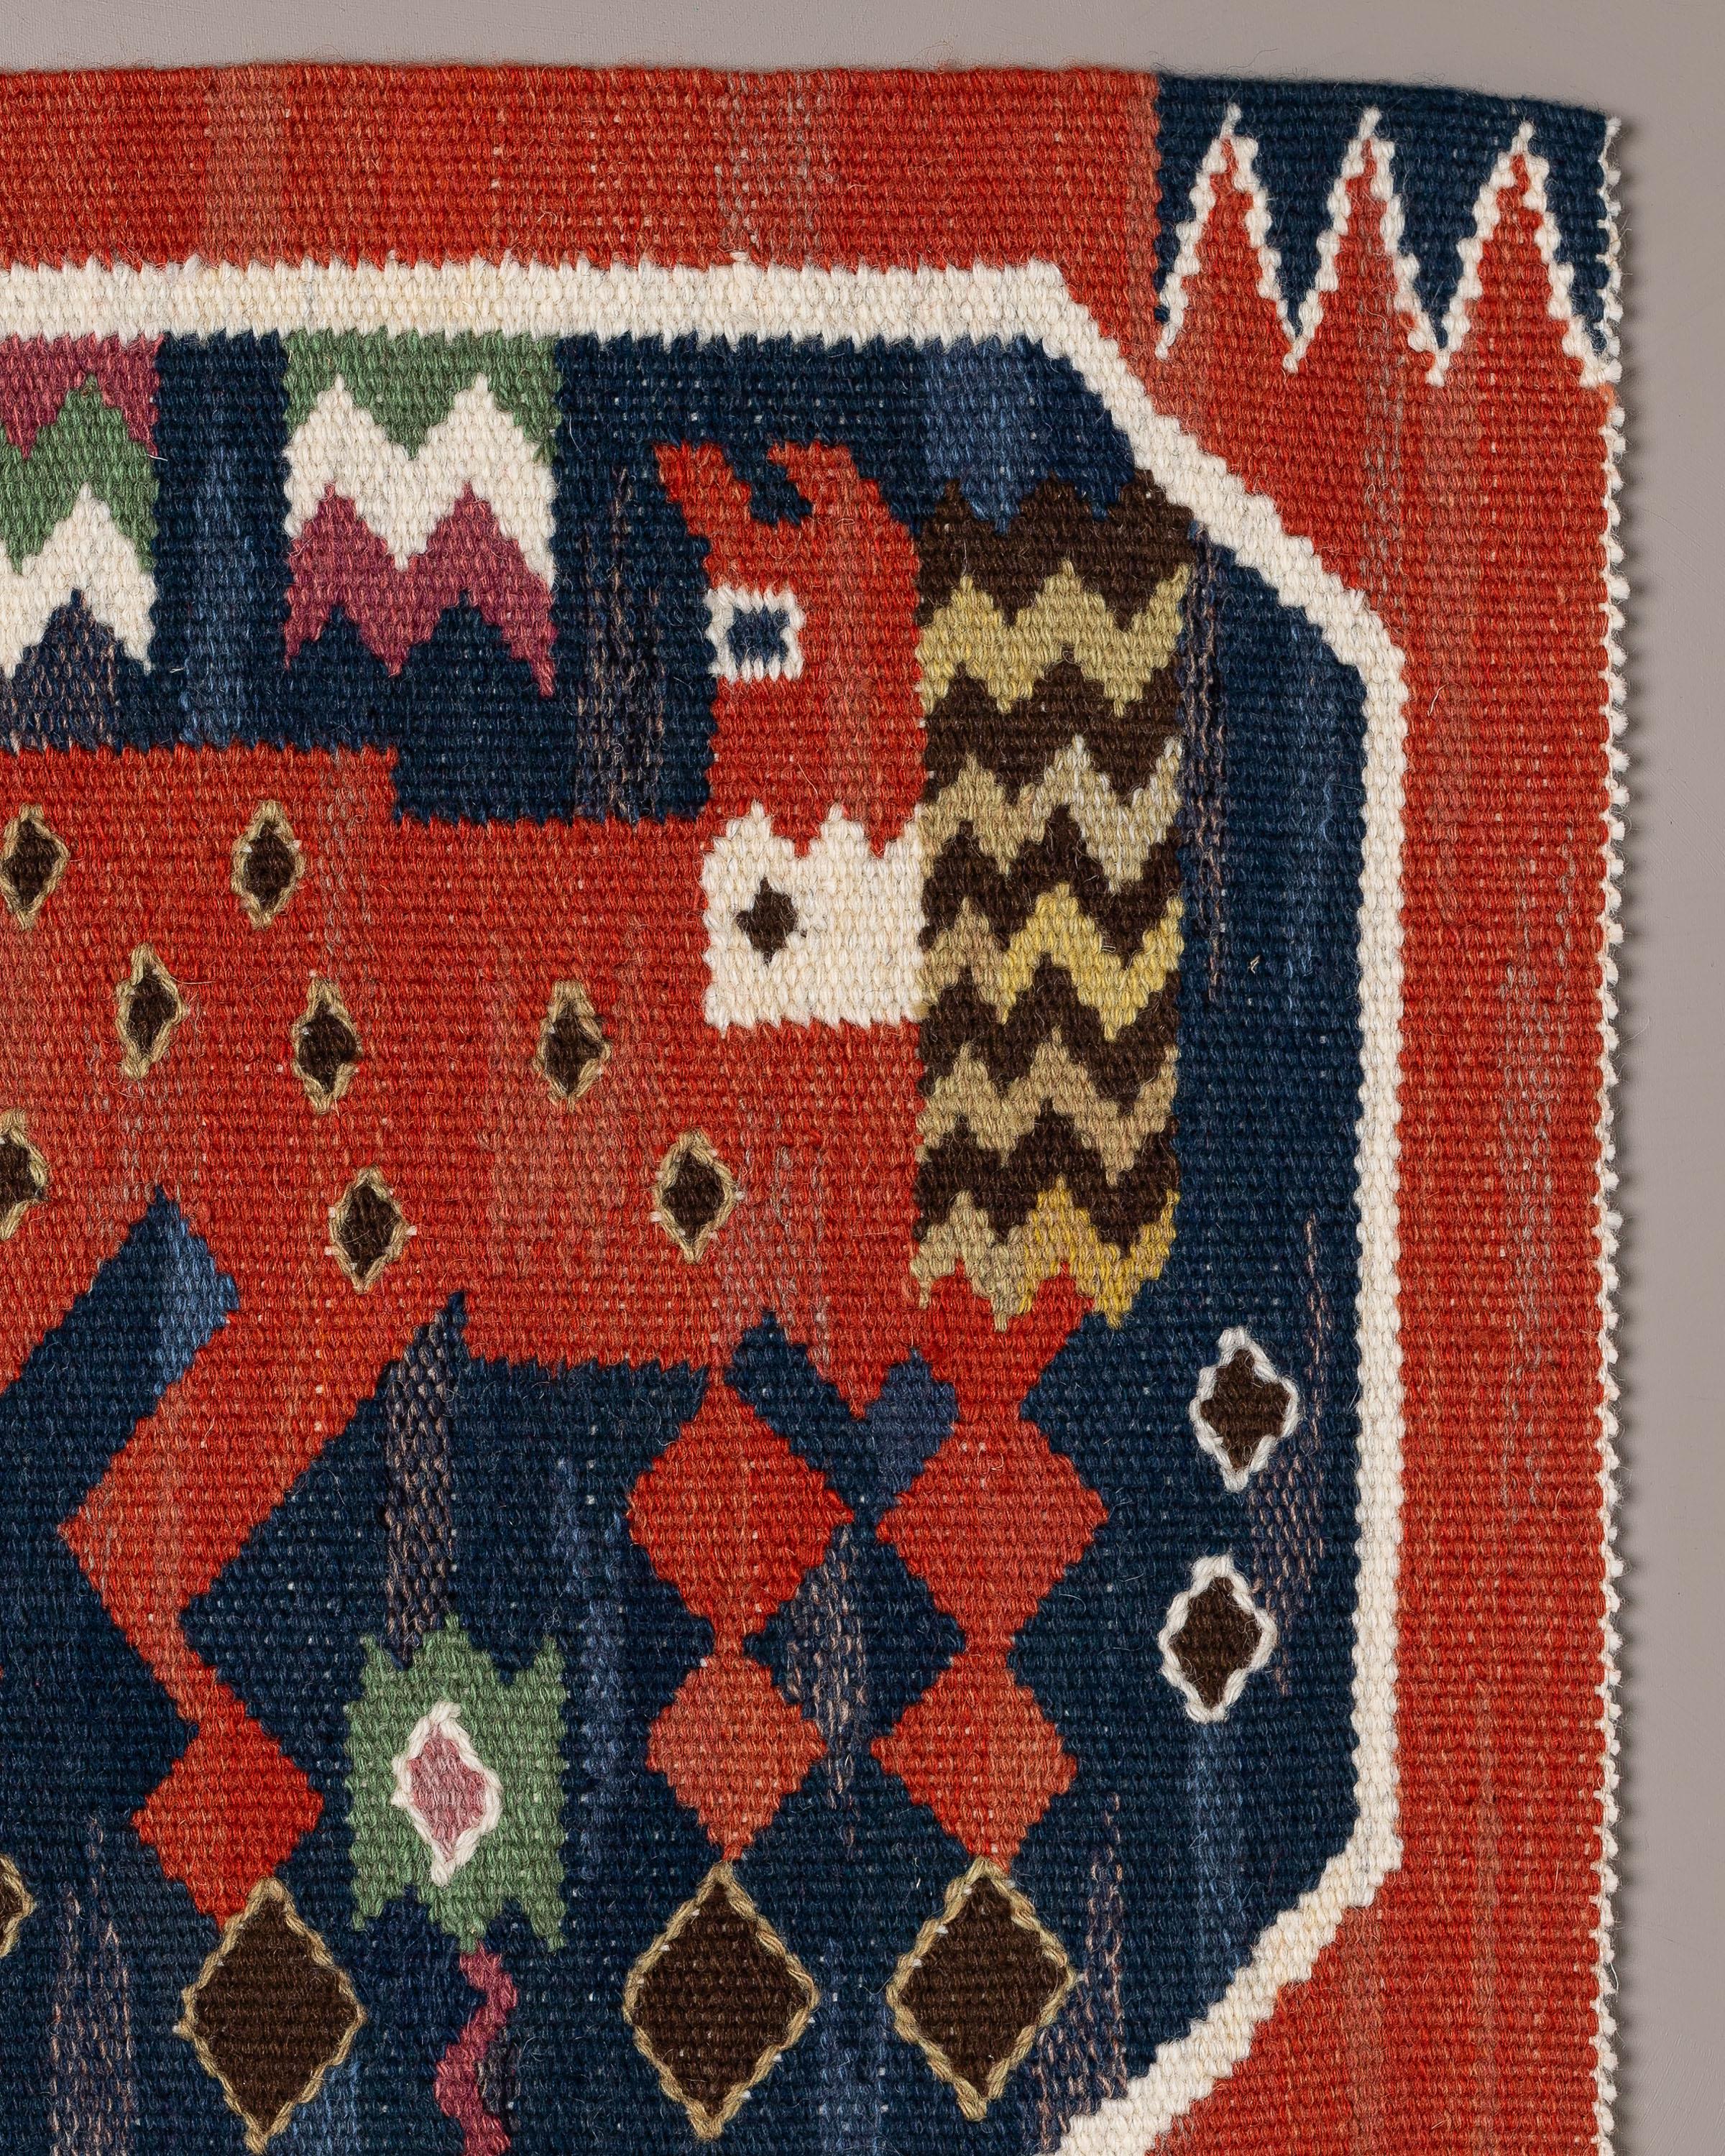 
Handwoven tapestry in wool with motif of a red horse, designed by Märta Måås-Fjetterström in 1930. 

Several horses with different poses appears in the collection of red horses by MMF. They are details from the large wall tapestry Röda Hästarna,